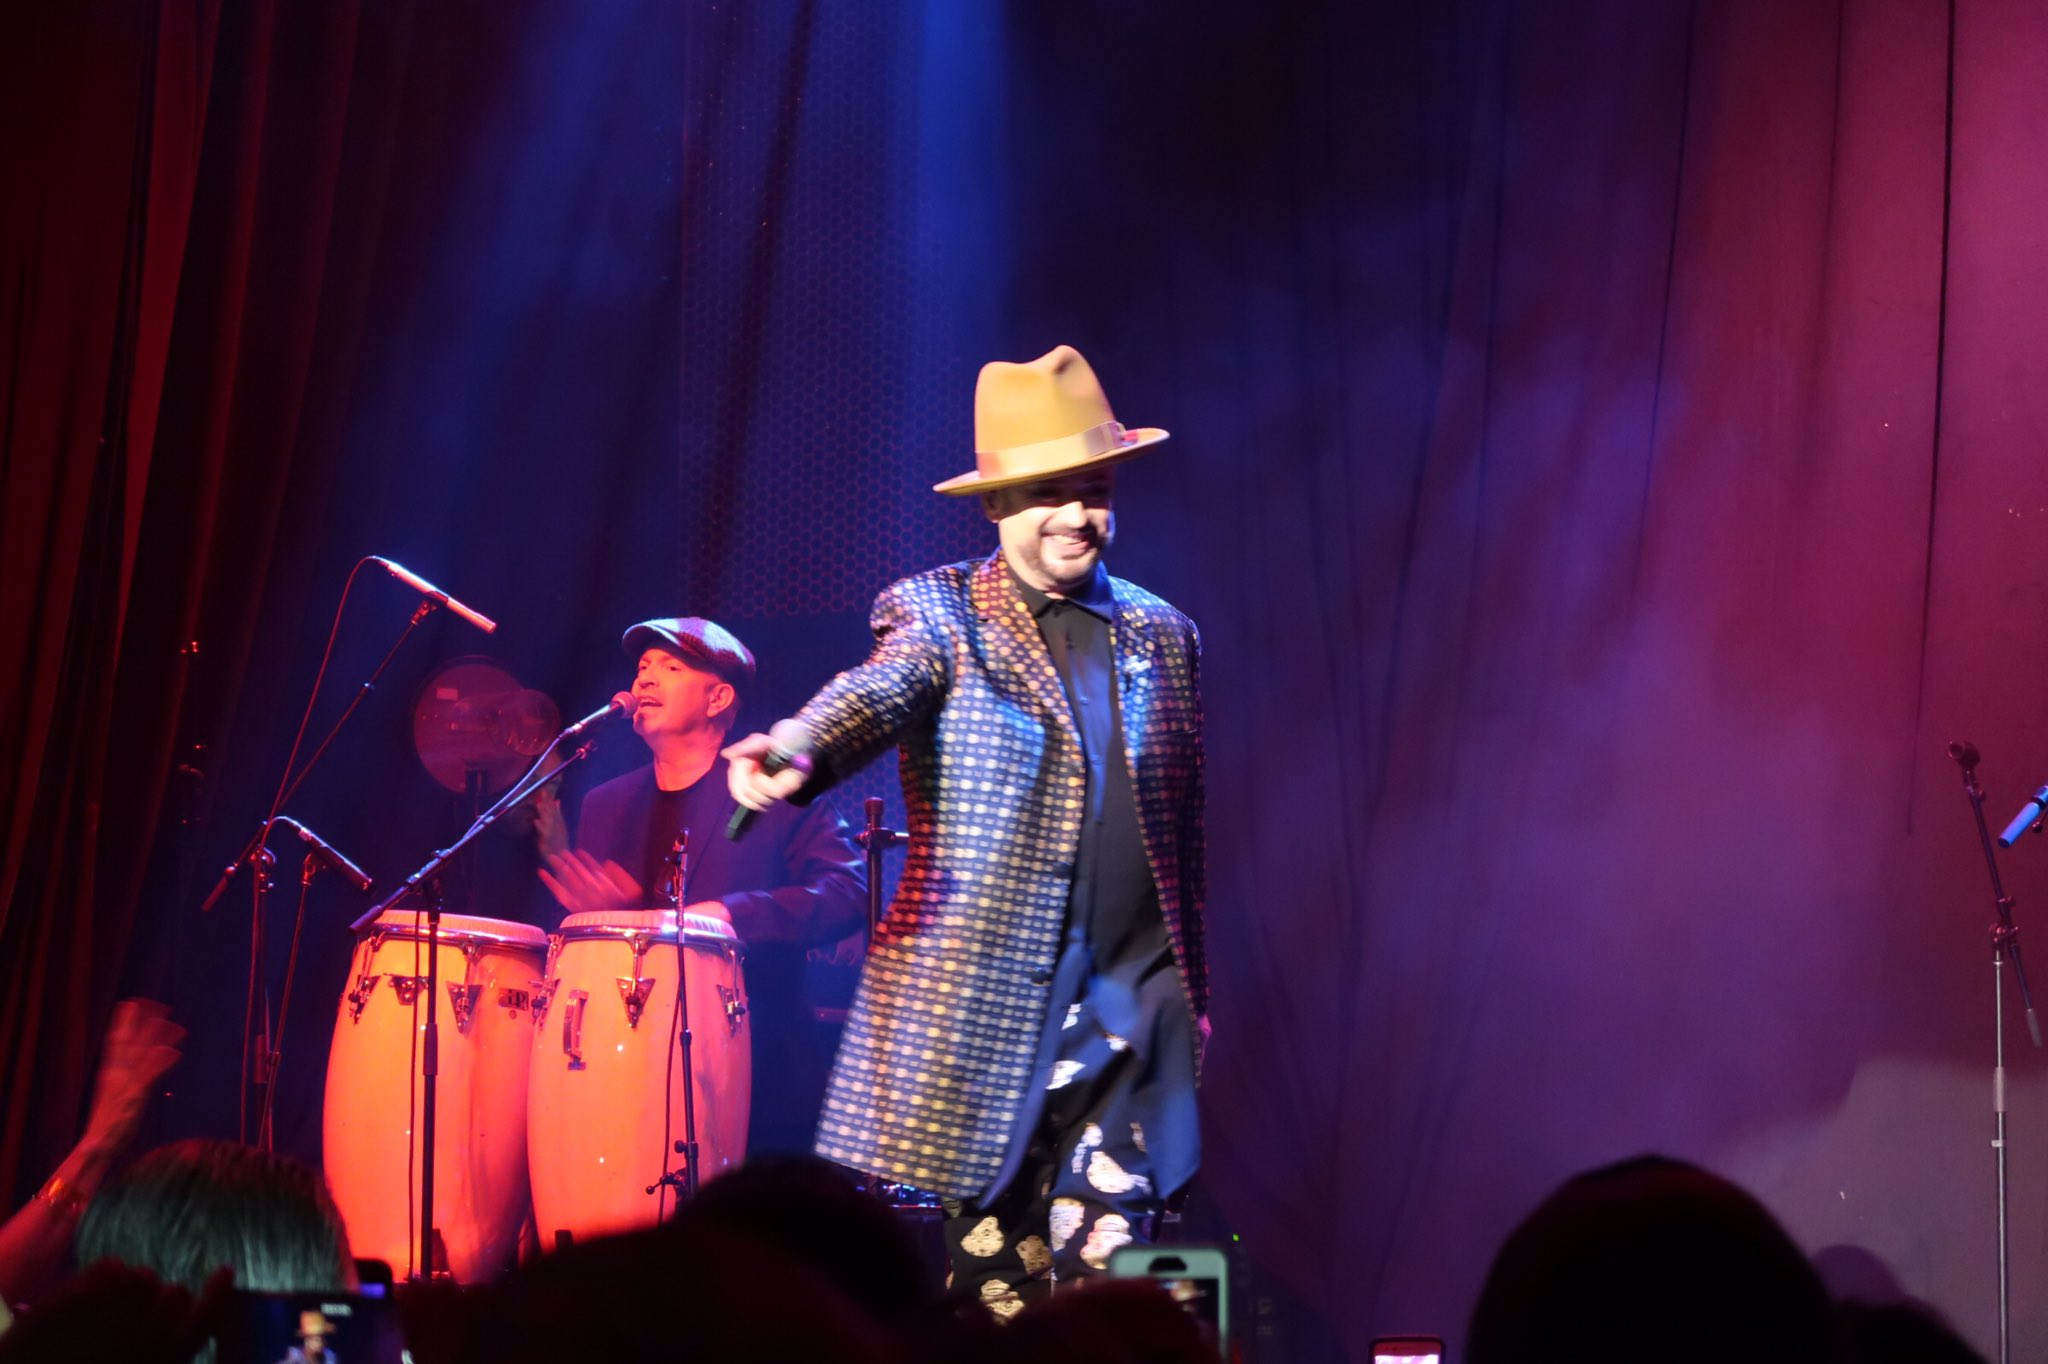 Morongo Casino on Twitter: "📸 Boy George & the Culture Club gave an performance last night's @kearth101 Totally #80s Concert at VIBE. https://t.co/Riez8Av5vS" / Twitter